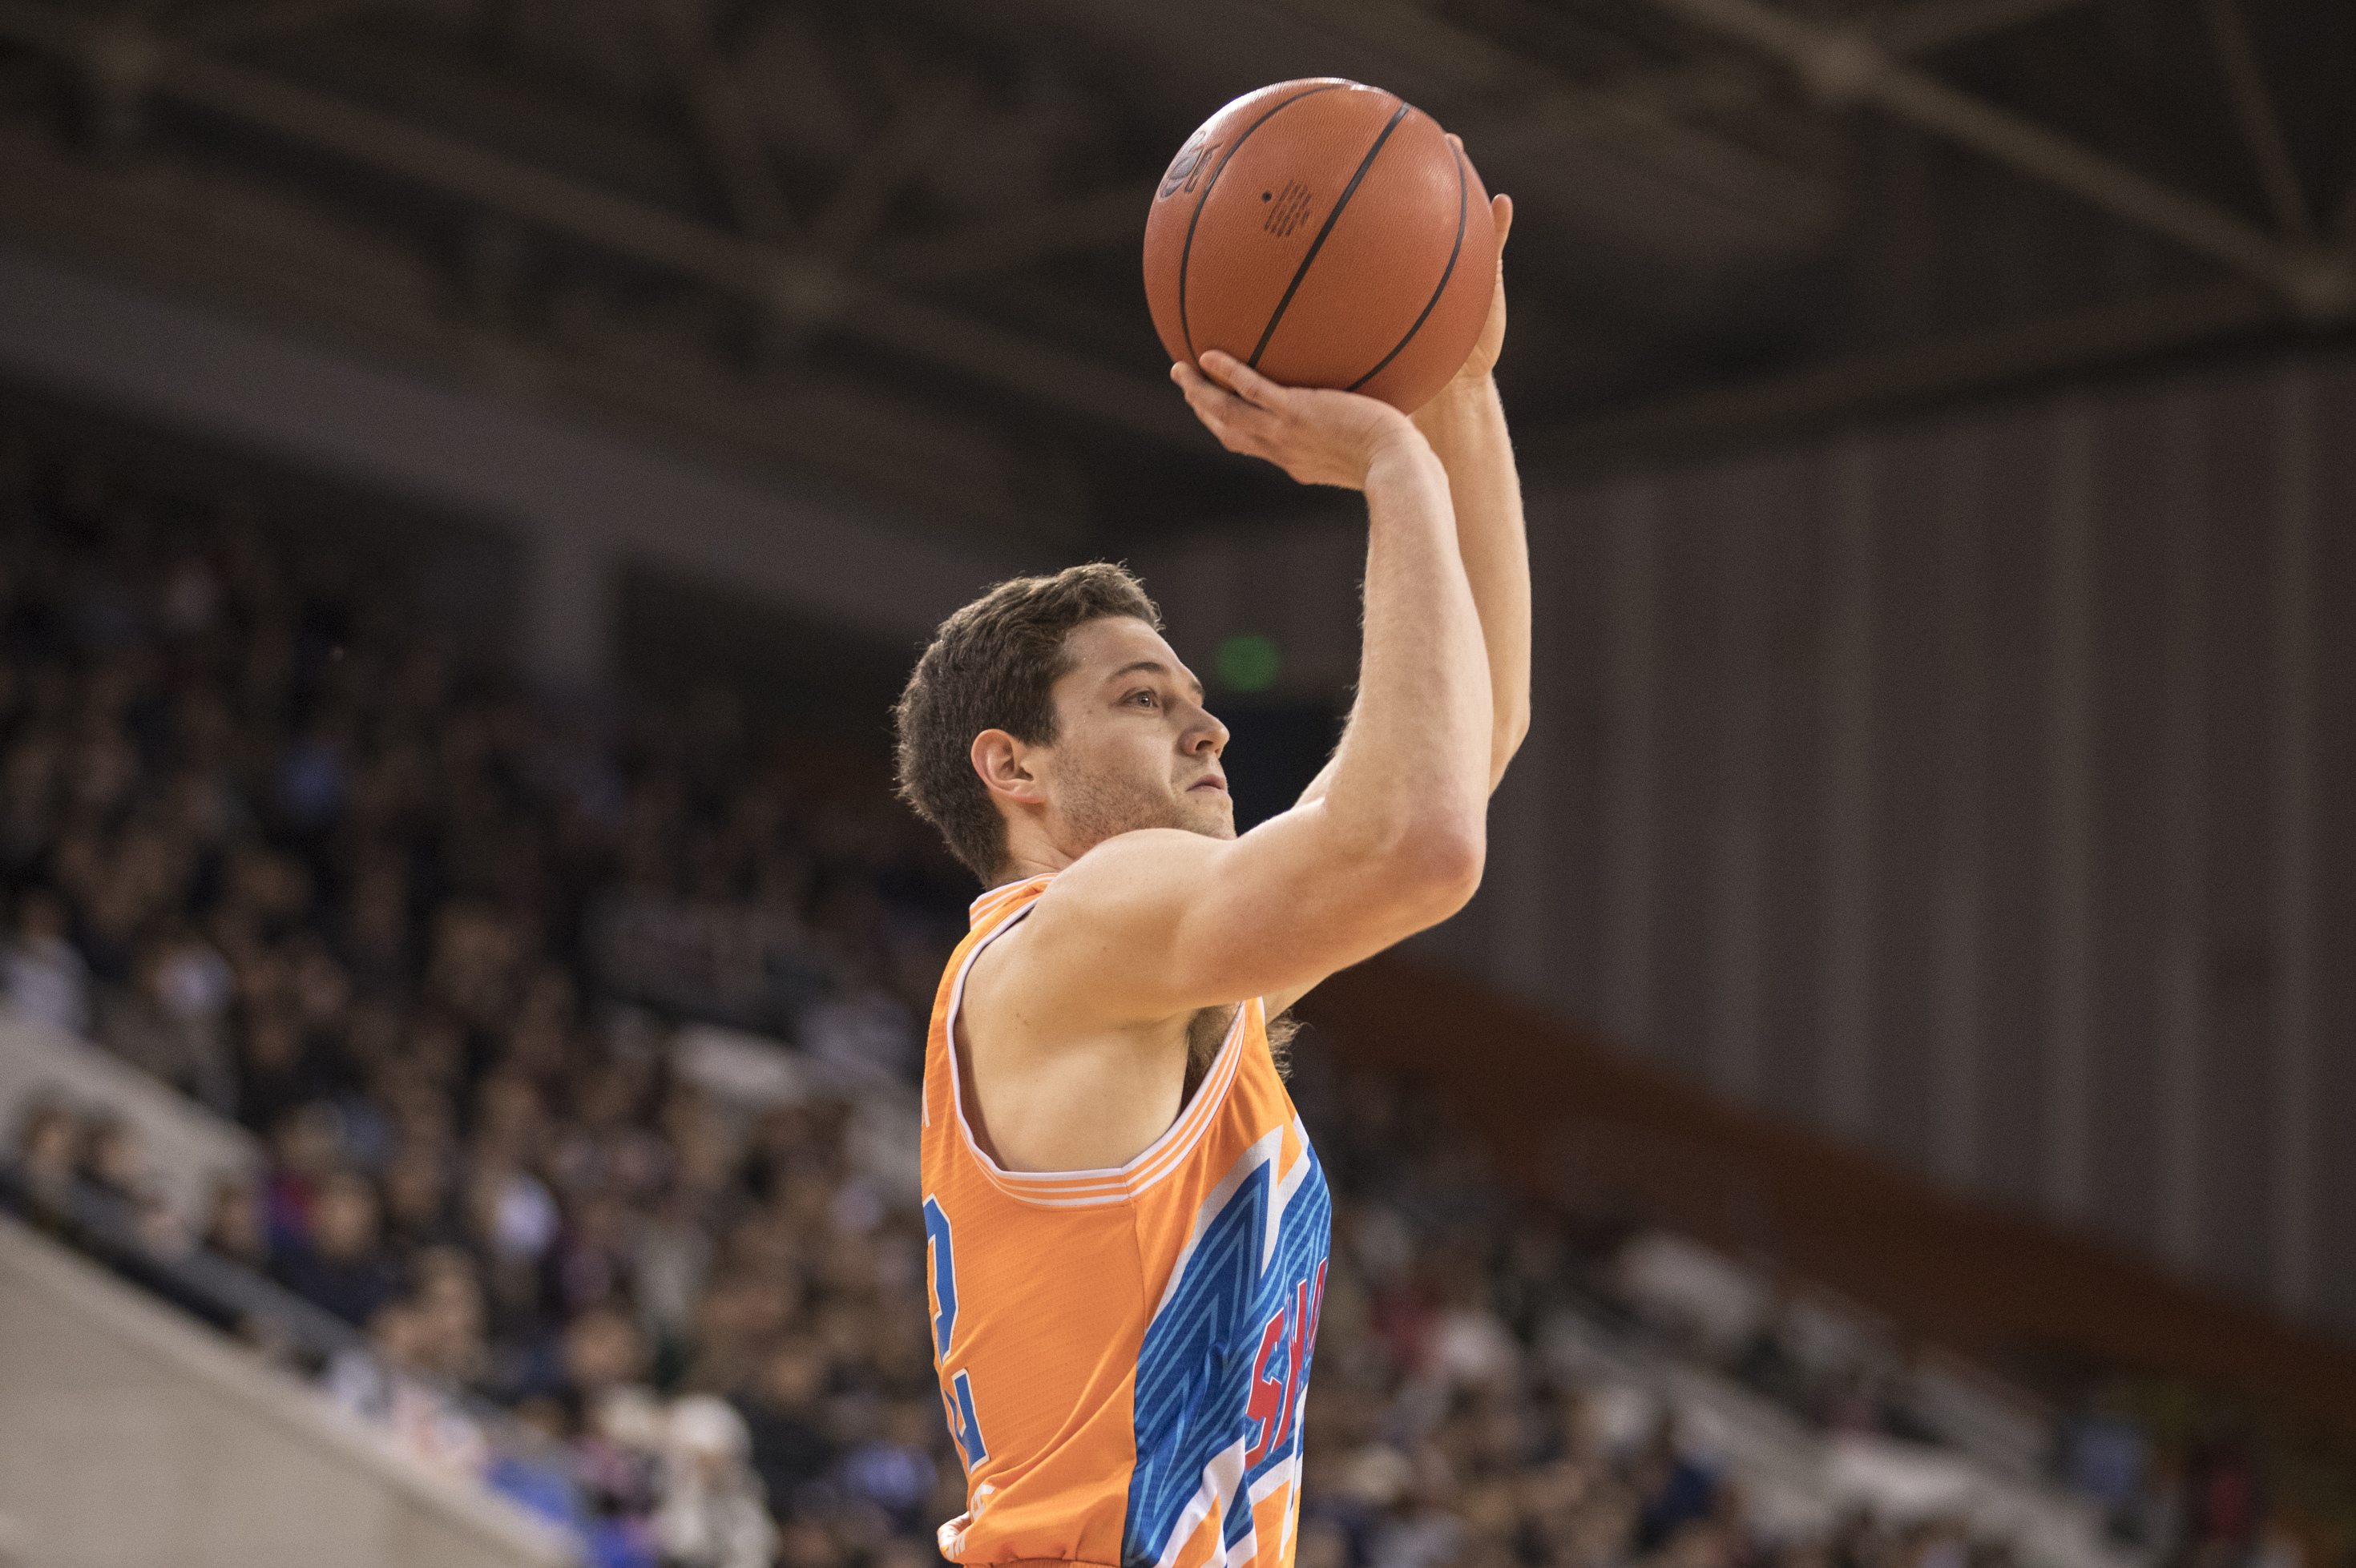 One year ago today, Jimmer Fredette dropped this ABSURD statline for the  Shanghai Sharks. 70 points 🤯